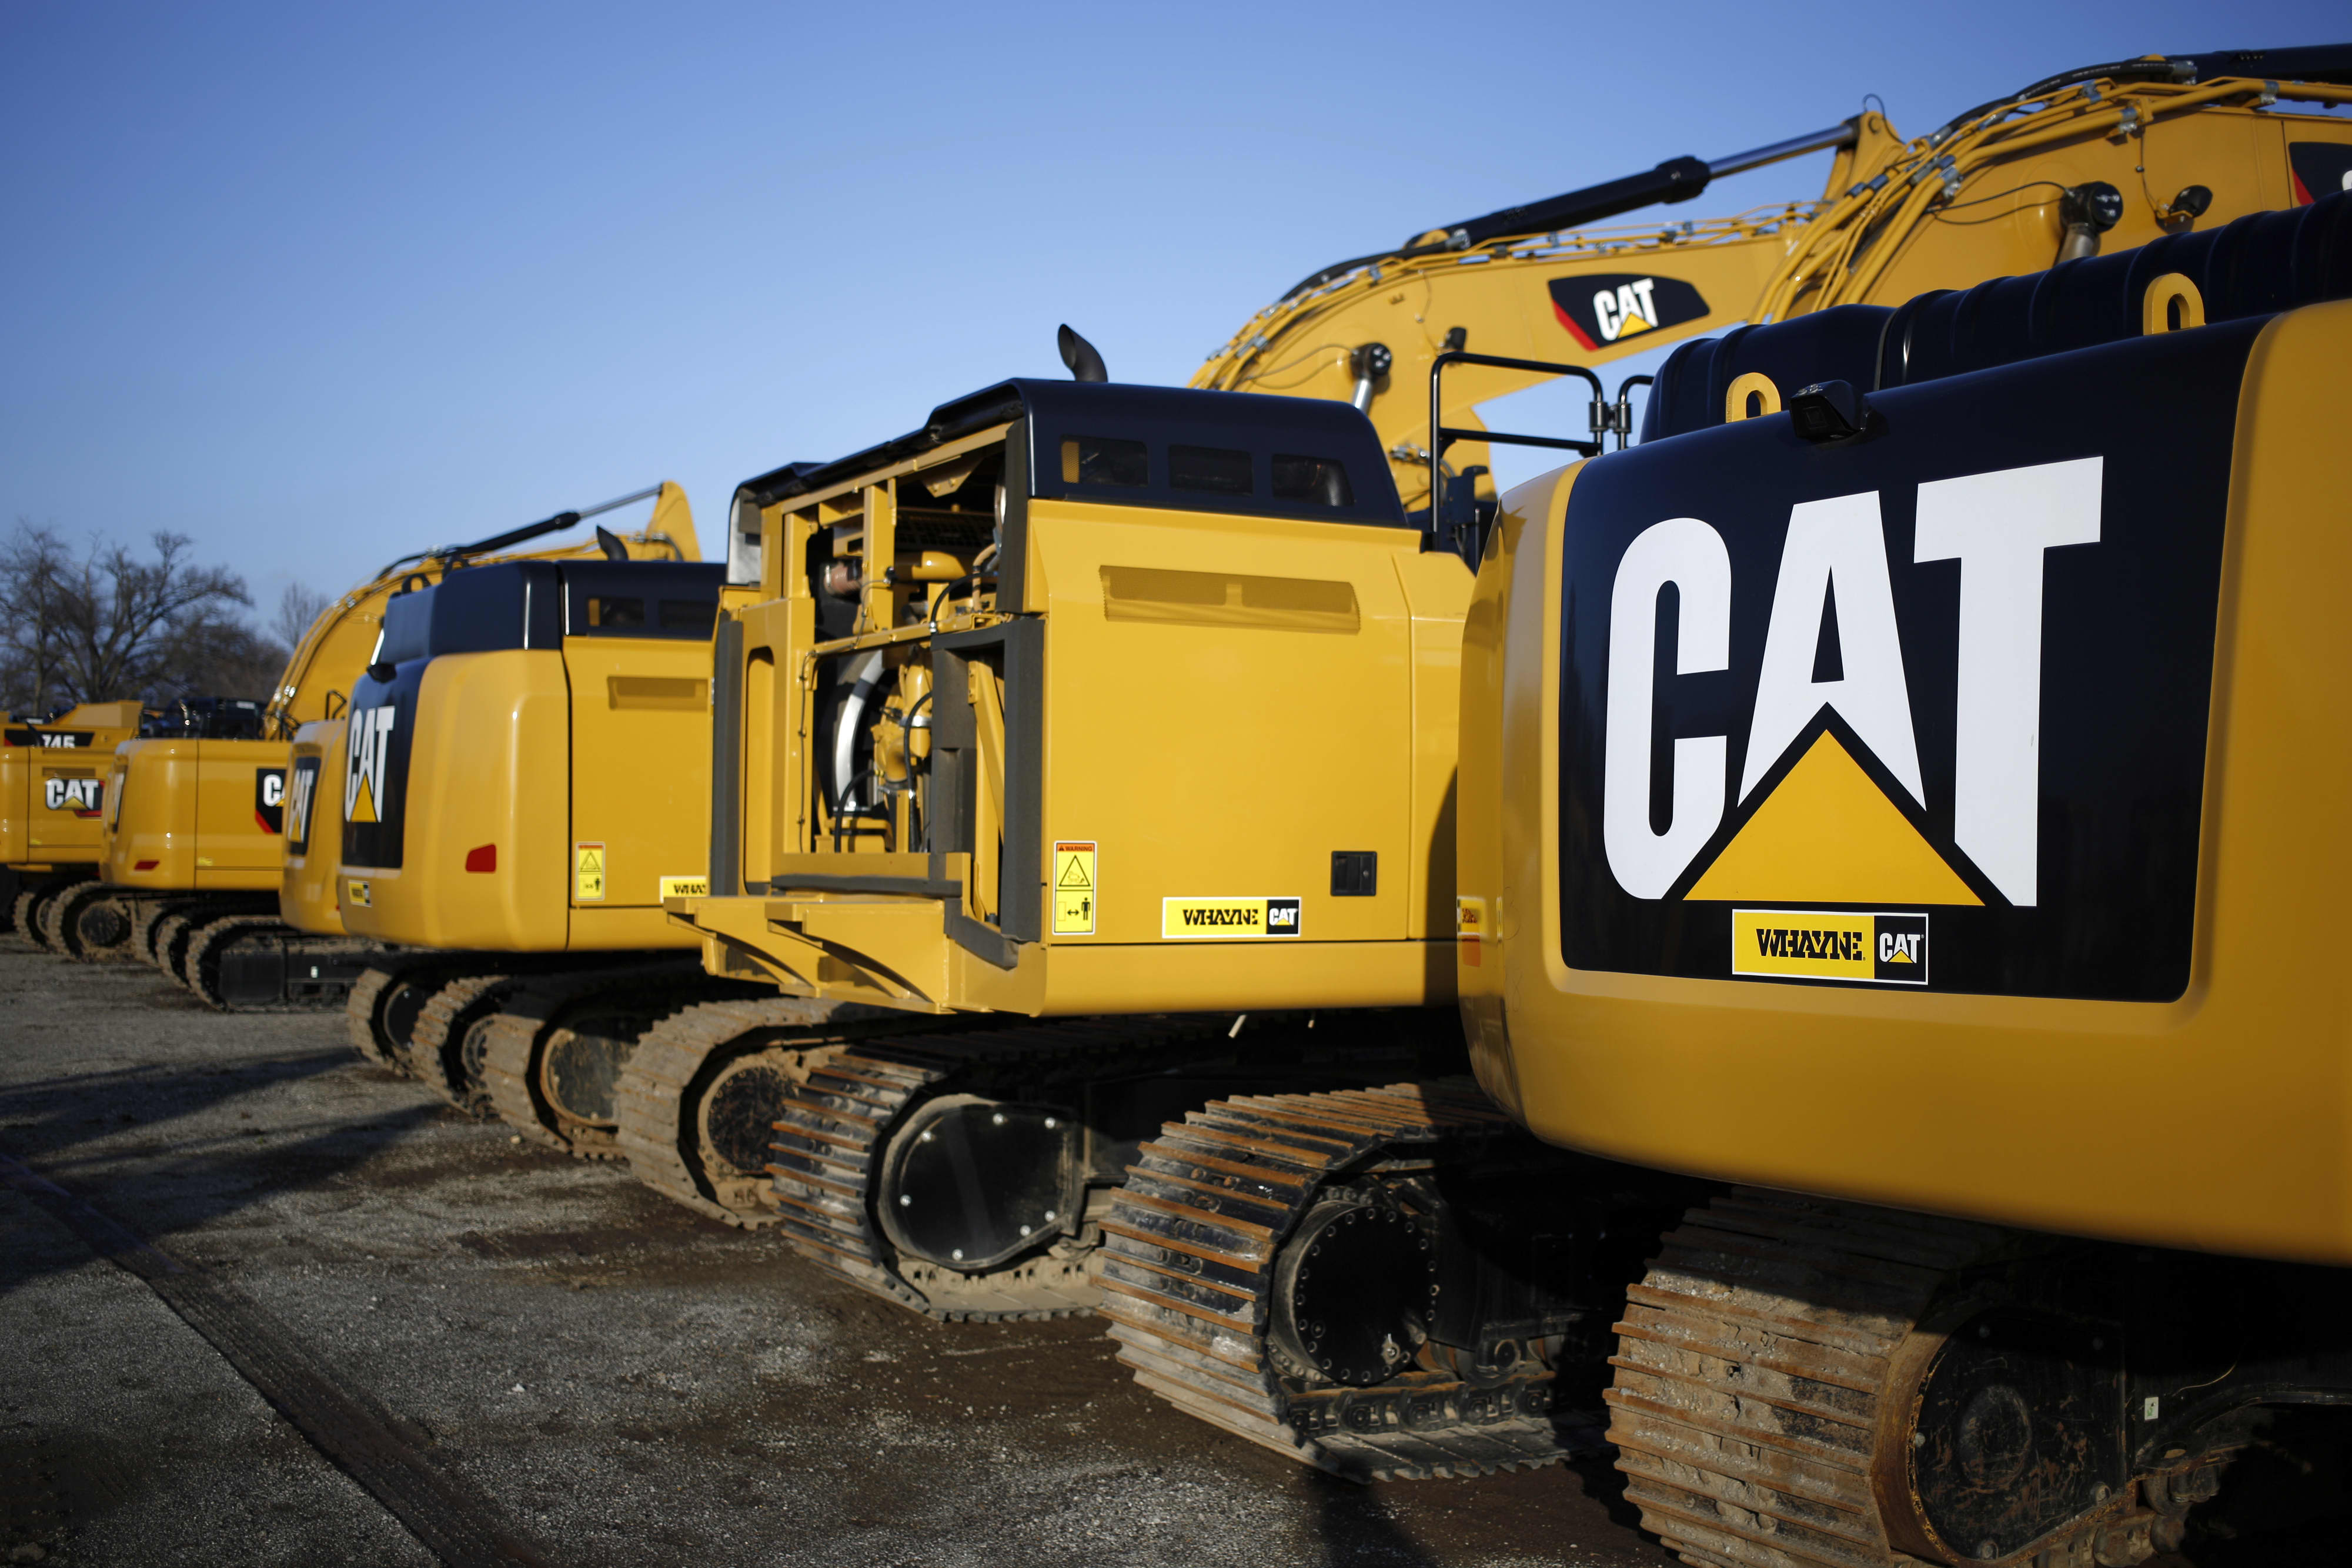 Caterpillar, Emerson and Pioneer are in the news. Here’s our Club take on the headlines